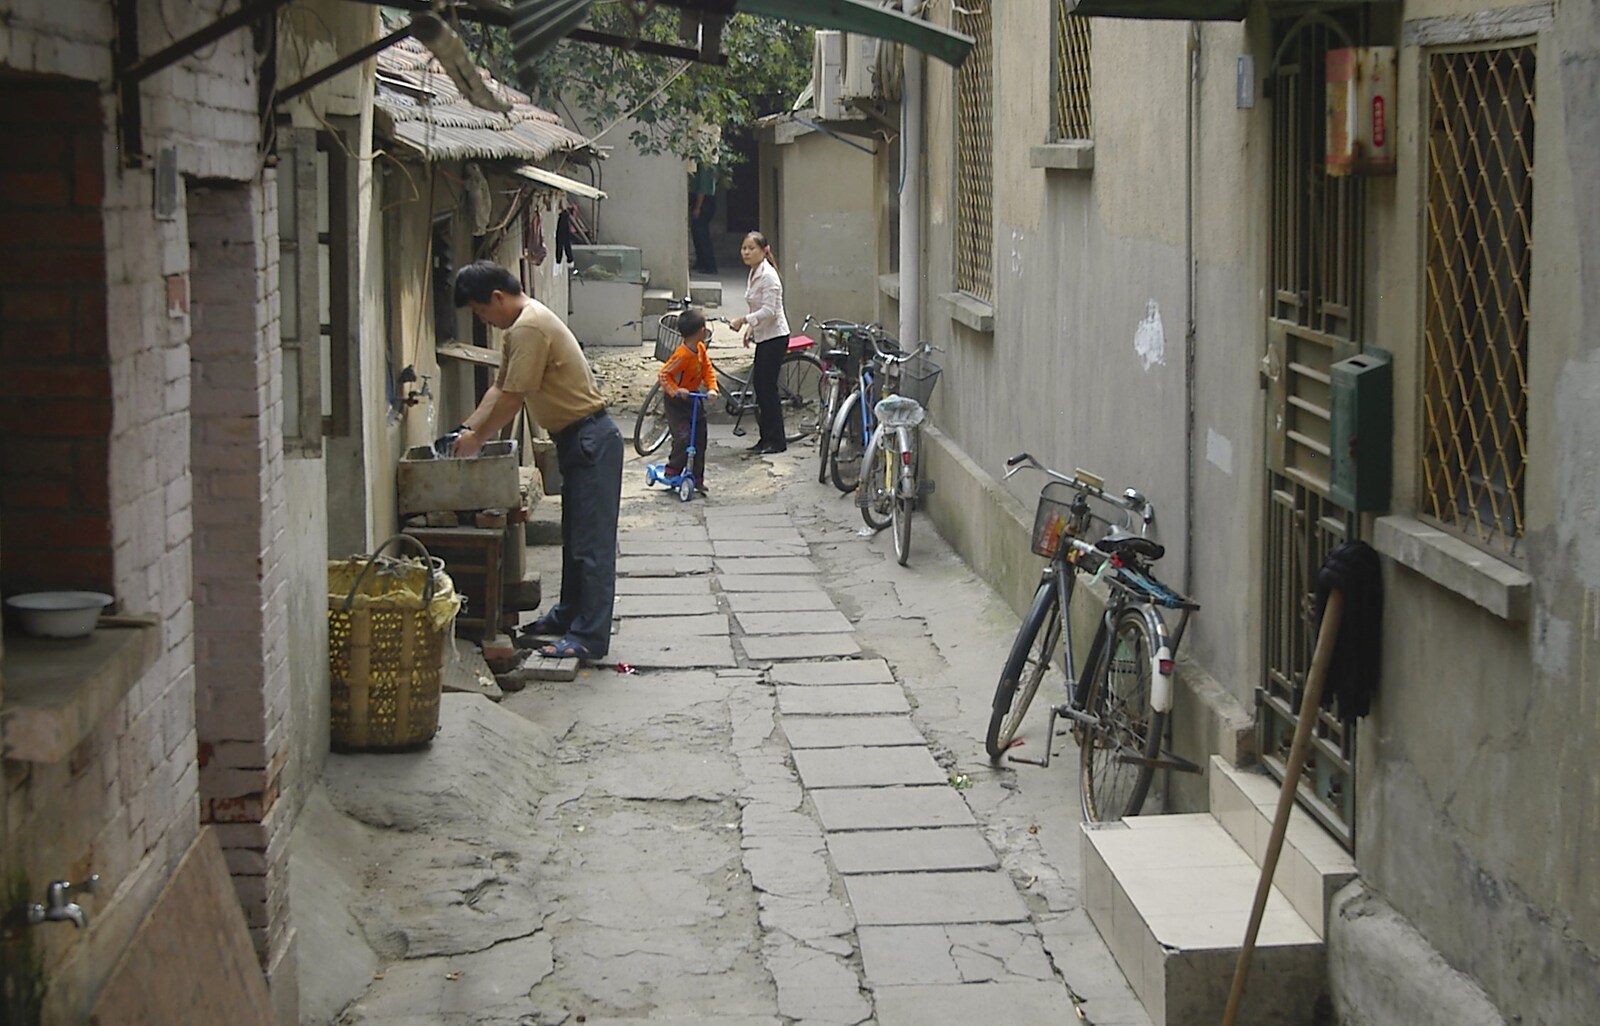 Down a back street, there's outdoor washing up from A Few Days in Nanjing, Jiangsu Province, China - 7th October 2006